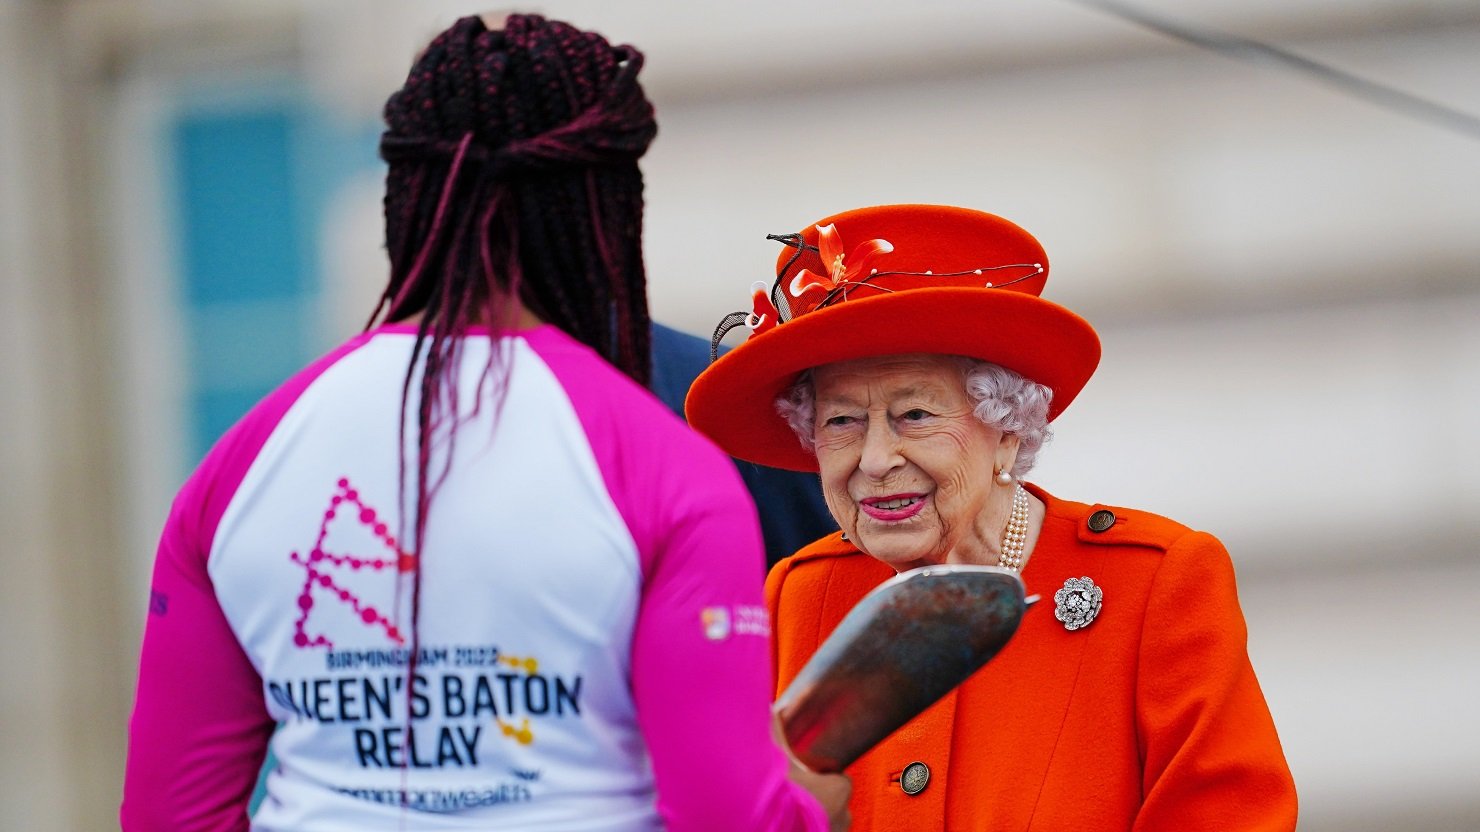 A girl receiving the Baton from the Queen